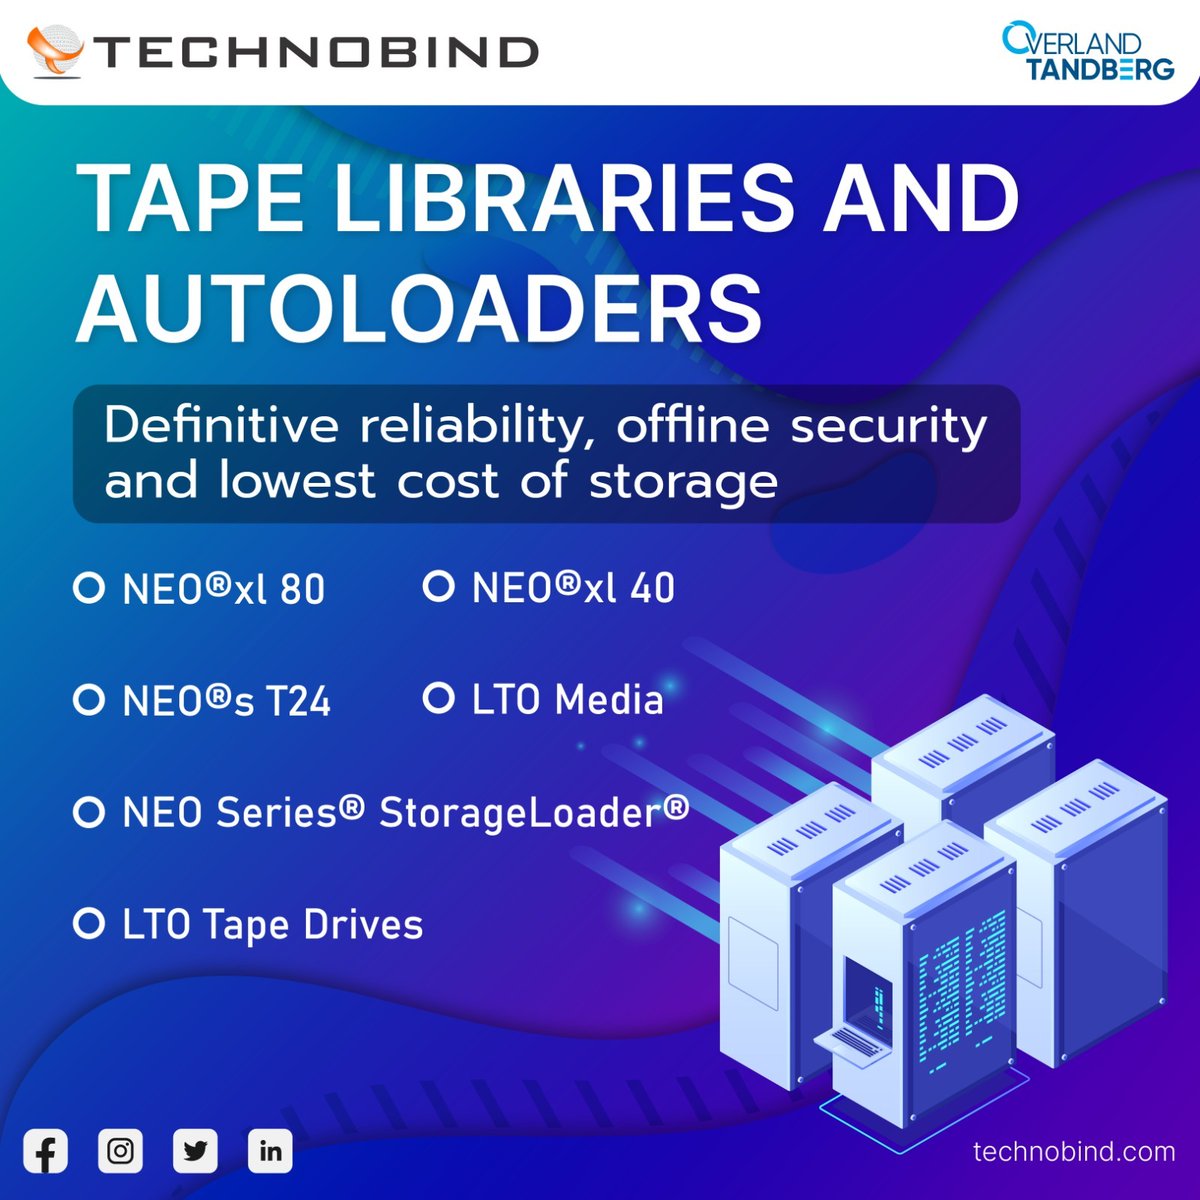 LTO tape by Overland-Tandberg EMEA provides the final layer of data protection and archiving. This is the perfect solution for storing and protecting long-term data.
#Technobind #tag #DefiningNewPossibilities #overlandtandberg #data #lot #dataprotection #dataarchiving